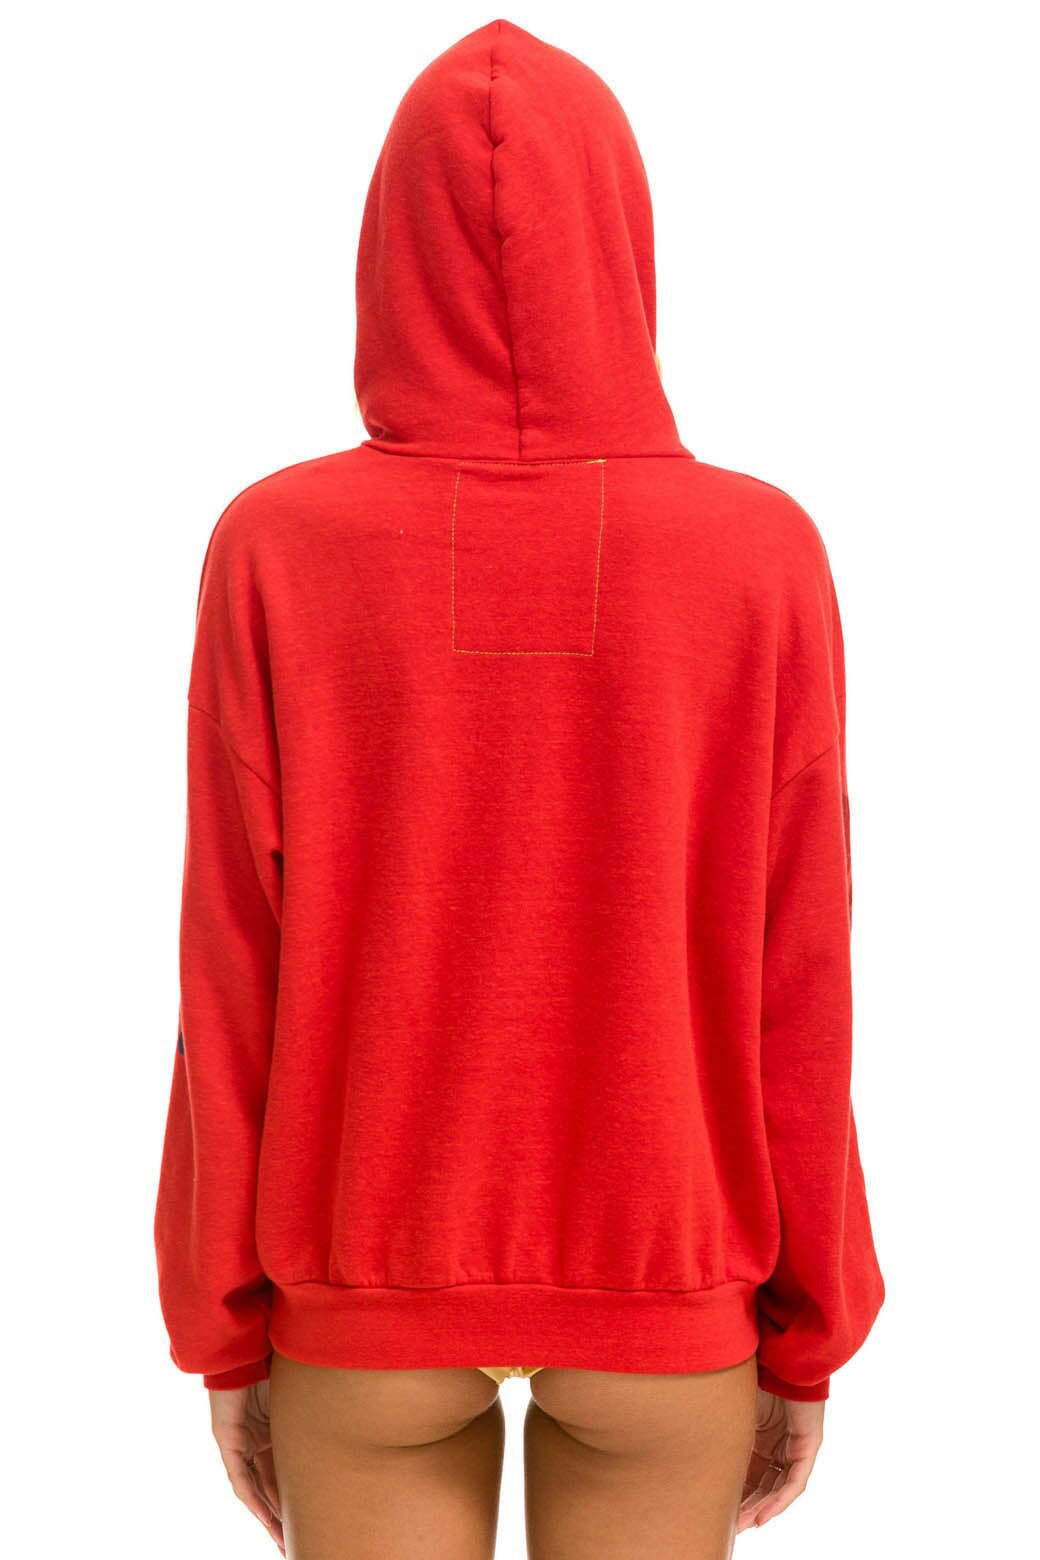 AVIATOR NATION MALIBU RELAXED PULLOVER HOODIE - RED Hoodie Aviator Nation 